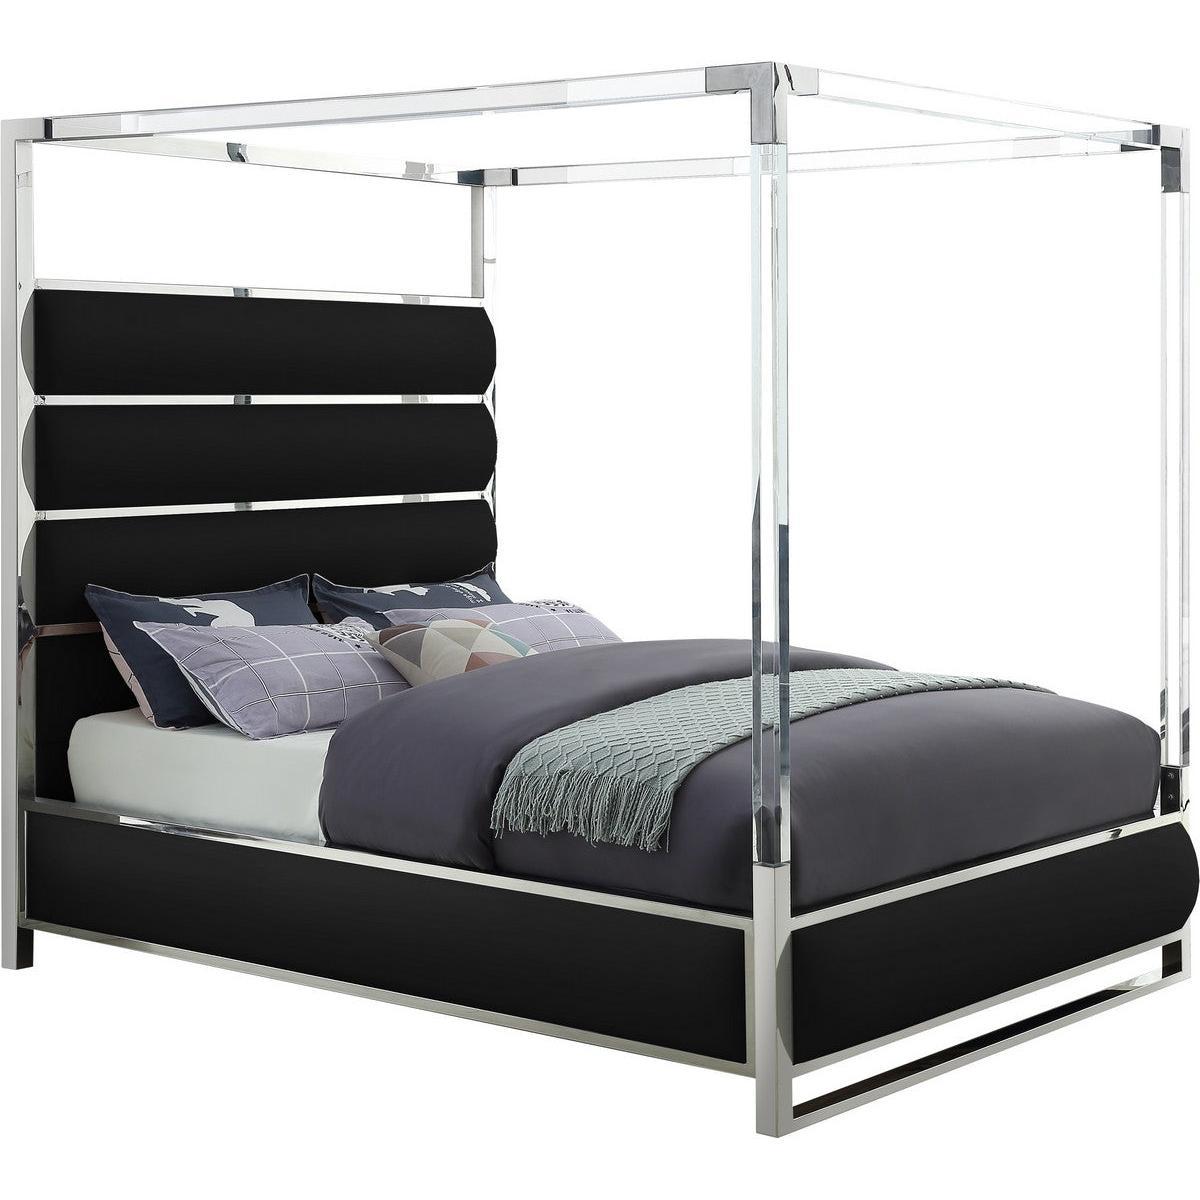 Meridian Furniture Encore Black Faux Leather King Bed (4 Boxes)Meridian Furniture - King Bed (4 Boxes) - Minimal And Modern - 1